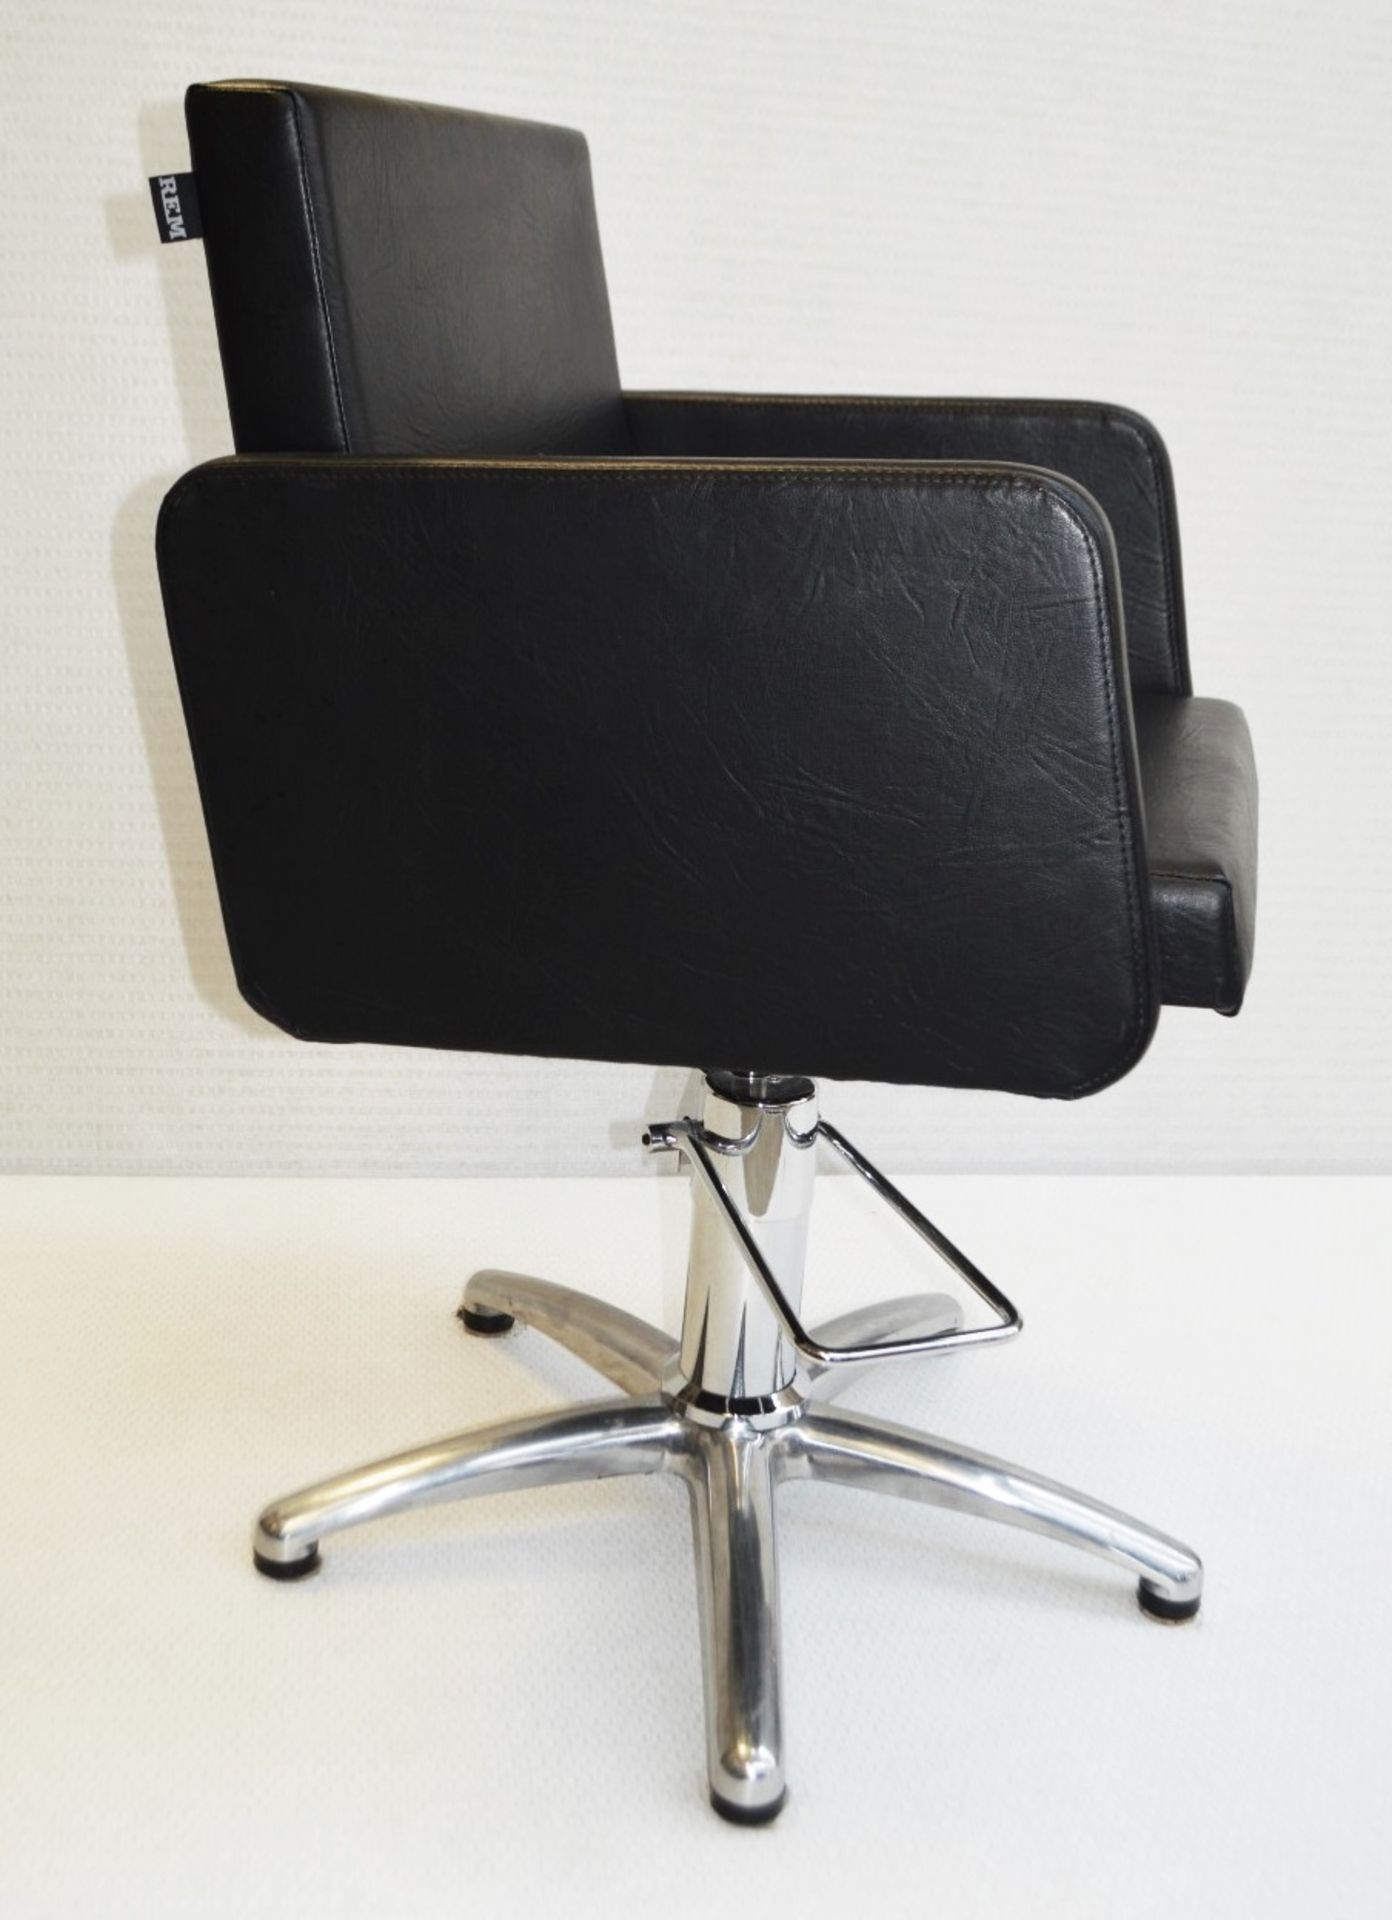 1 x Beauty Salon Hairdressing Styling Chair In Black Faux Leather - Original RRP £396.00 - Image 2 of 5